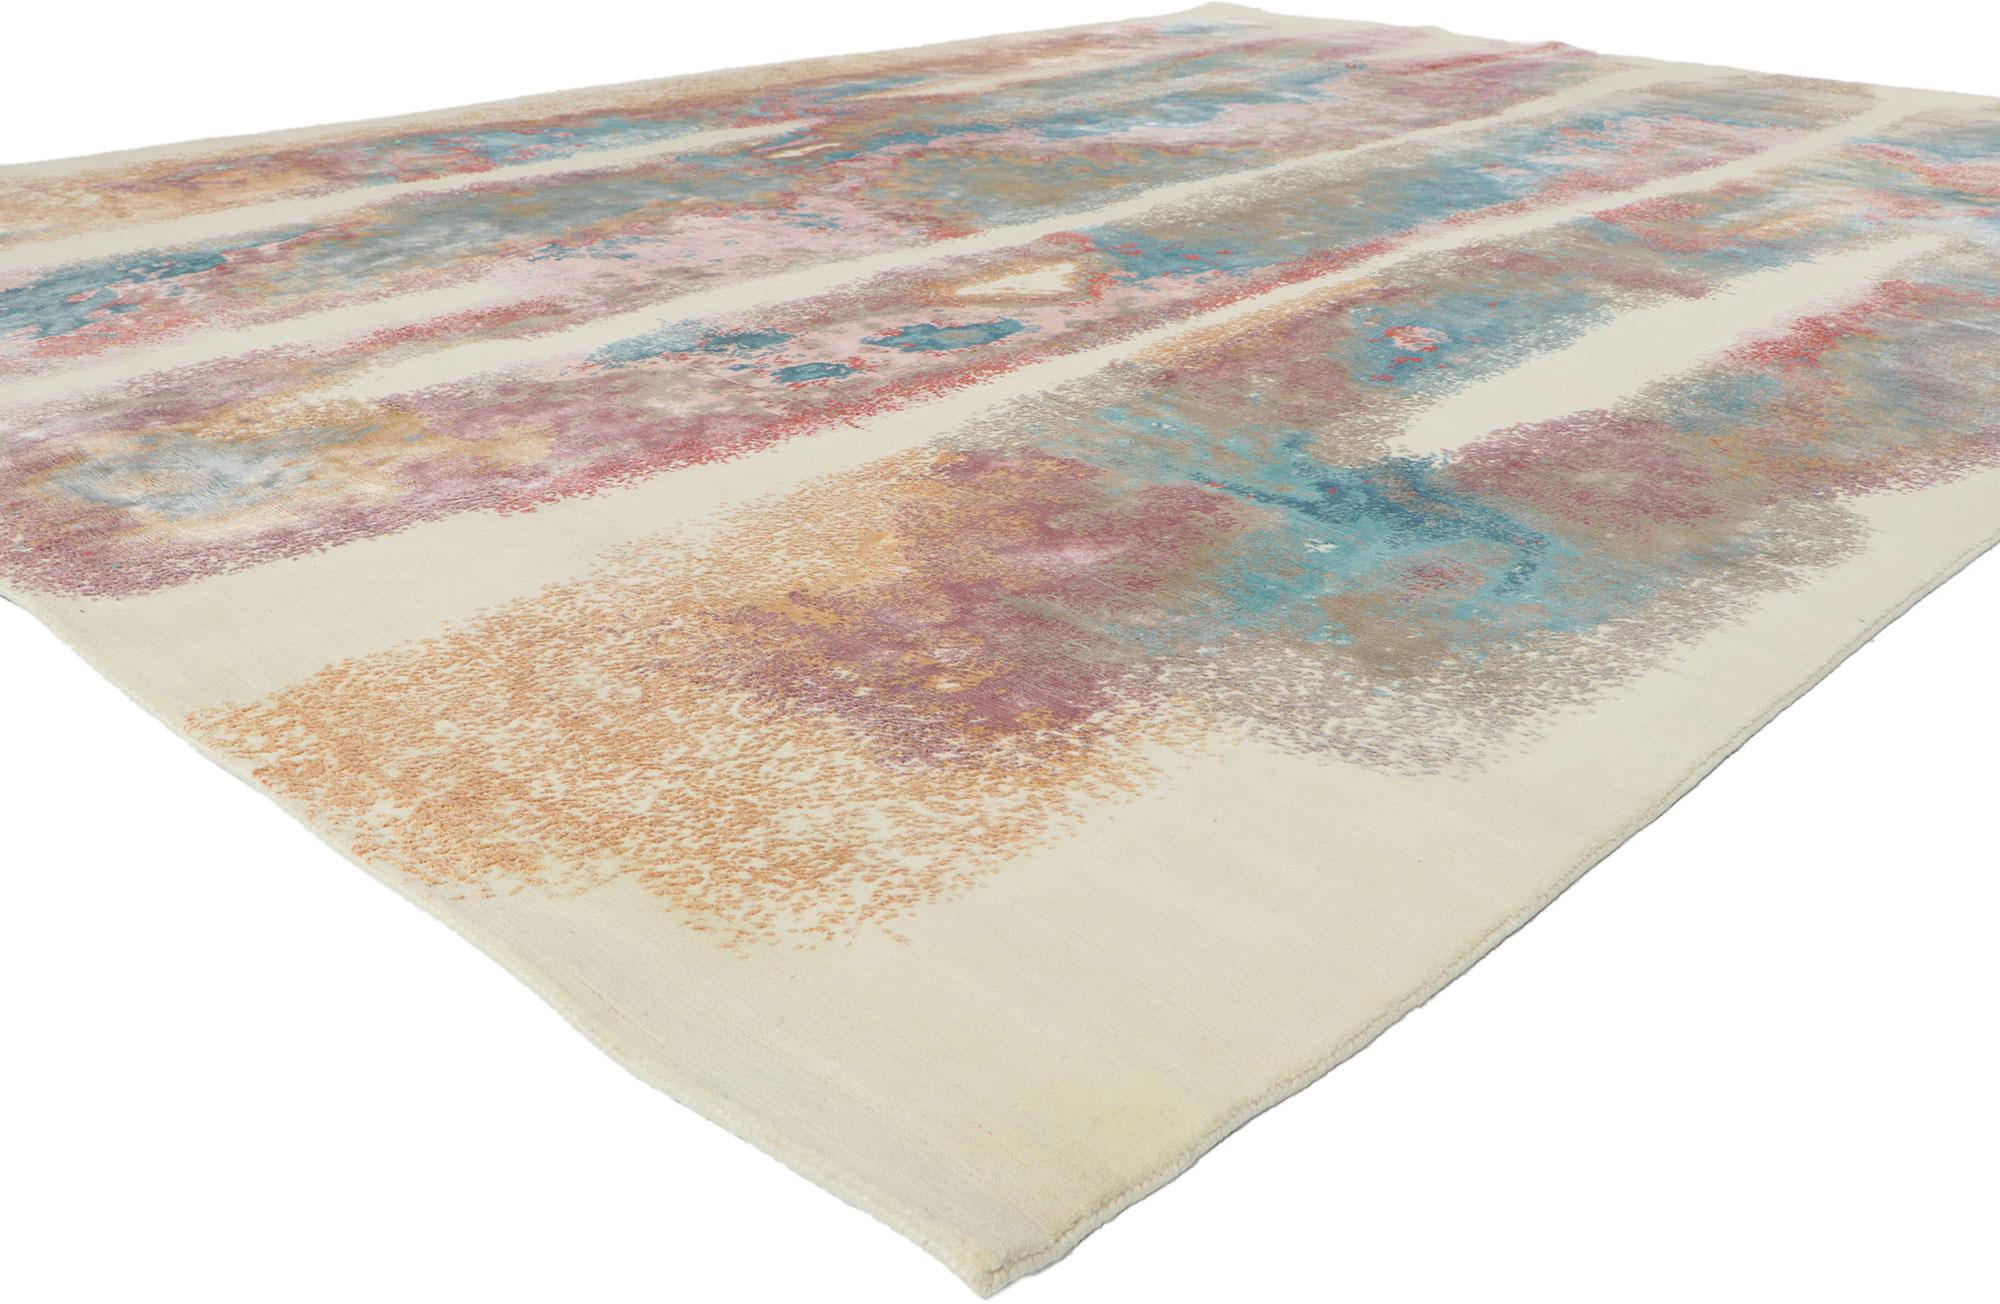 30867 New Contemporary Abstract Wool & Silk Rug, 08'11 x 12'01. Showcasing a modern style and raised silk design with incredible detail and texture, this hand knotted contemporary textured rug is a captivating vision of woven beauty. The